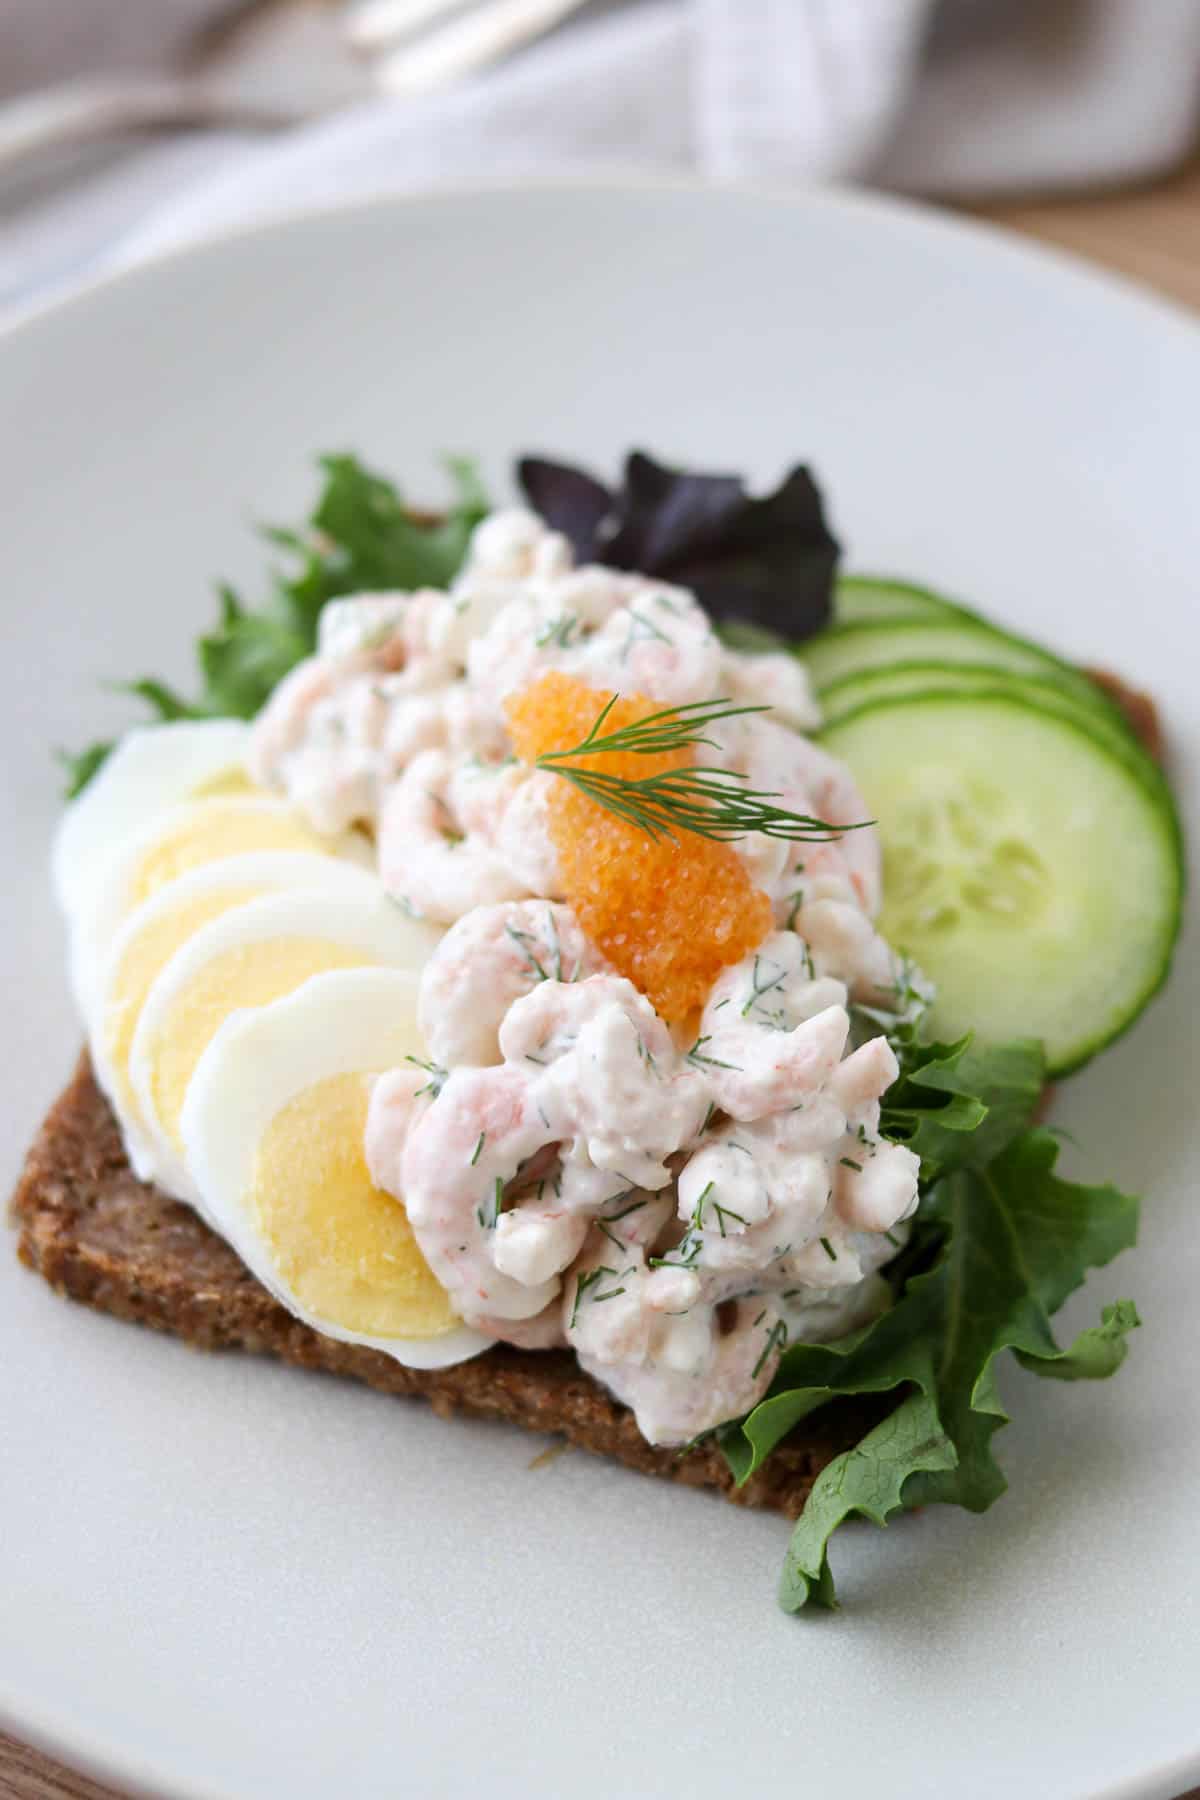 Skagenröra on rye bread with sliced hard boiled egg and sliced cucumber and topped with caviar.